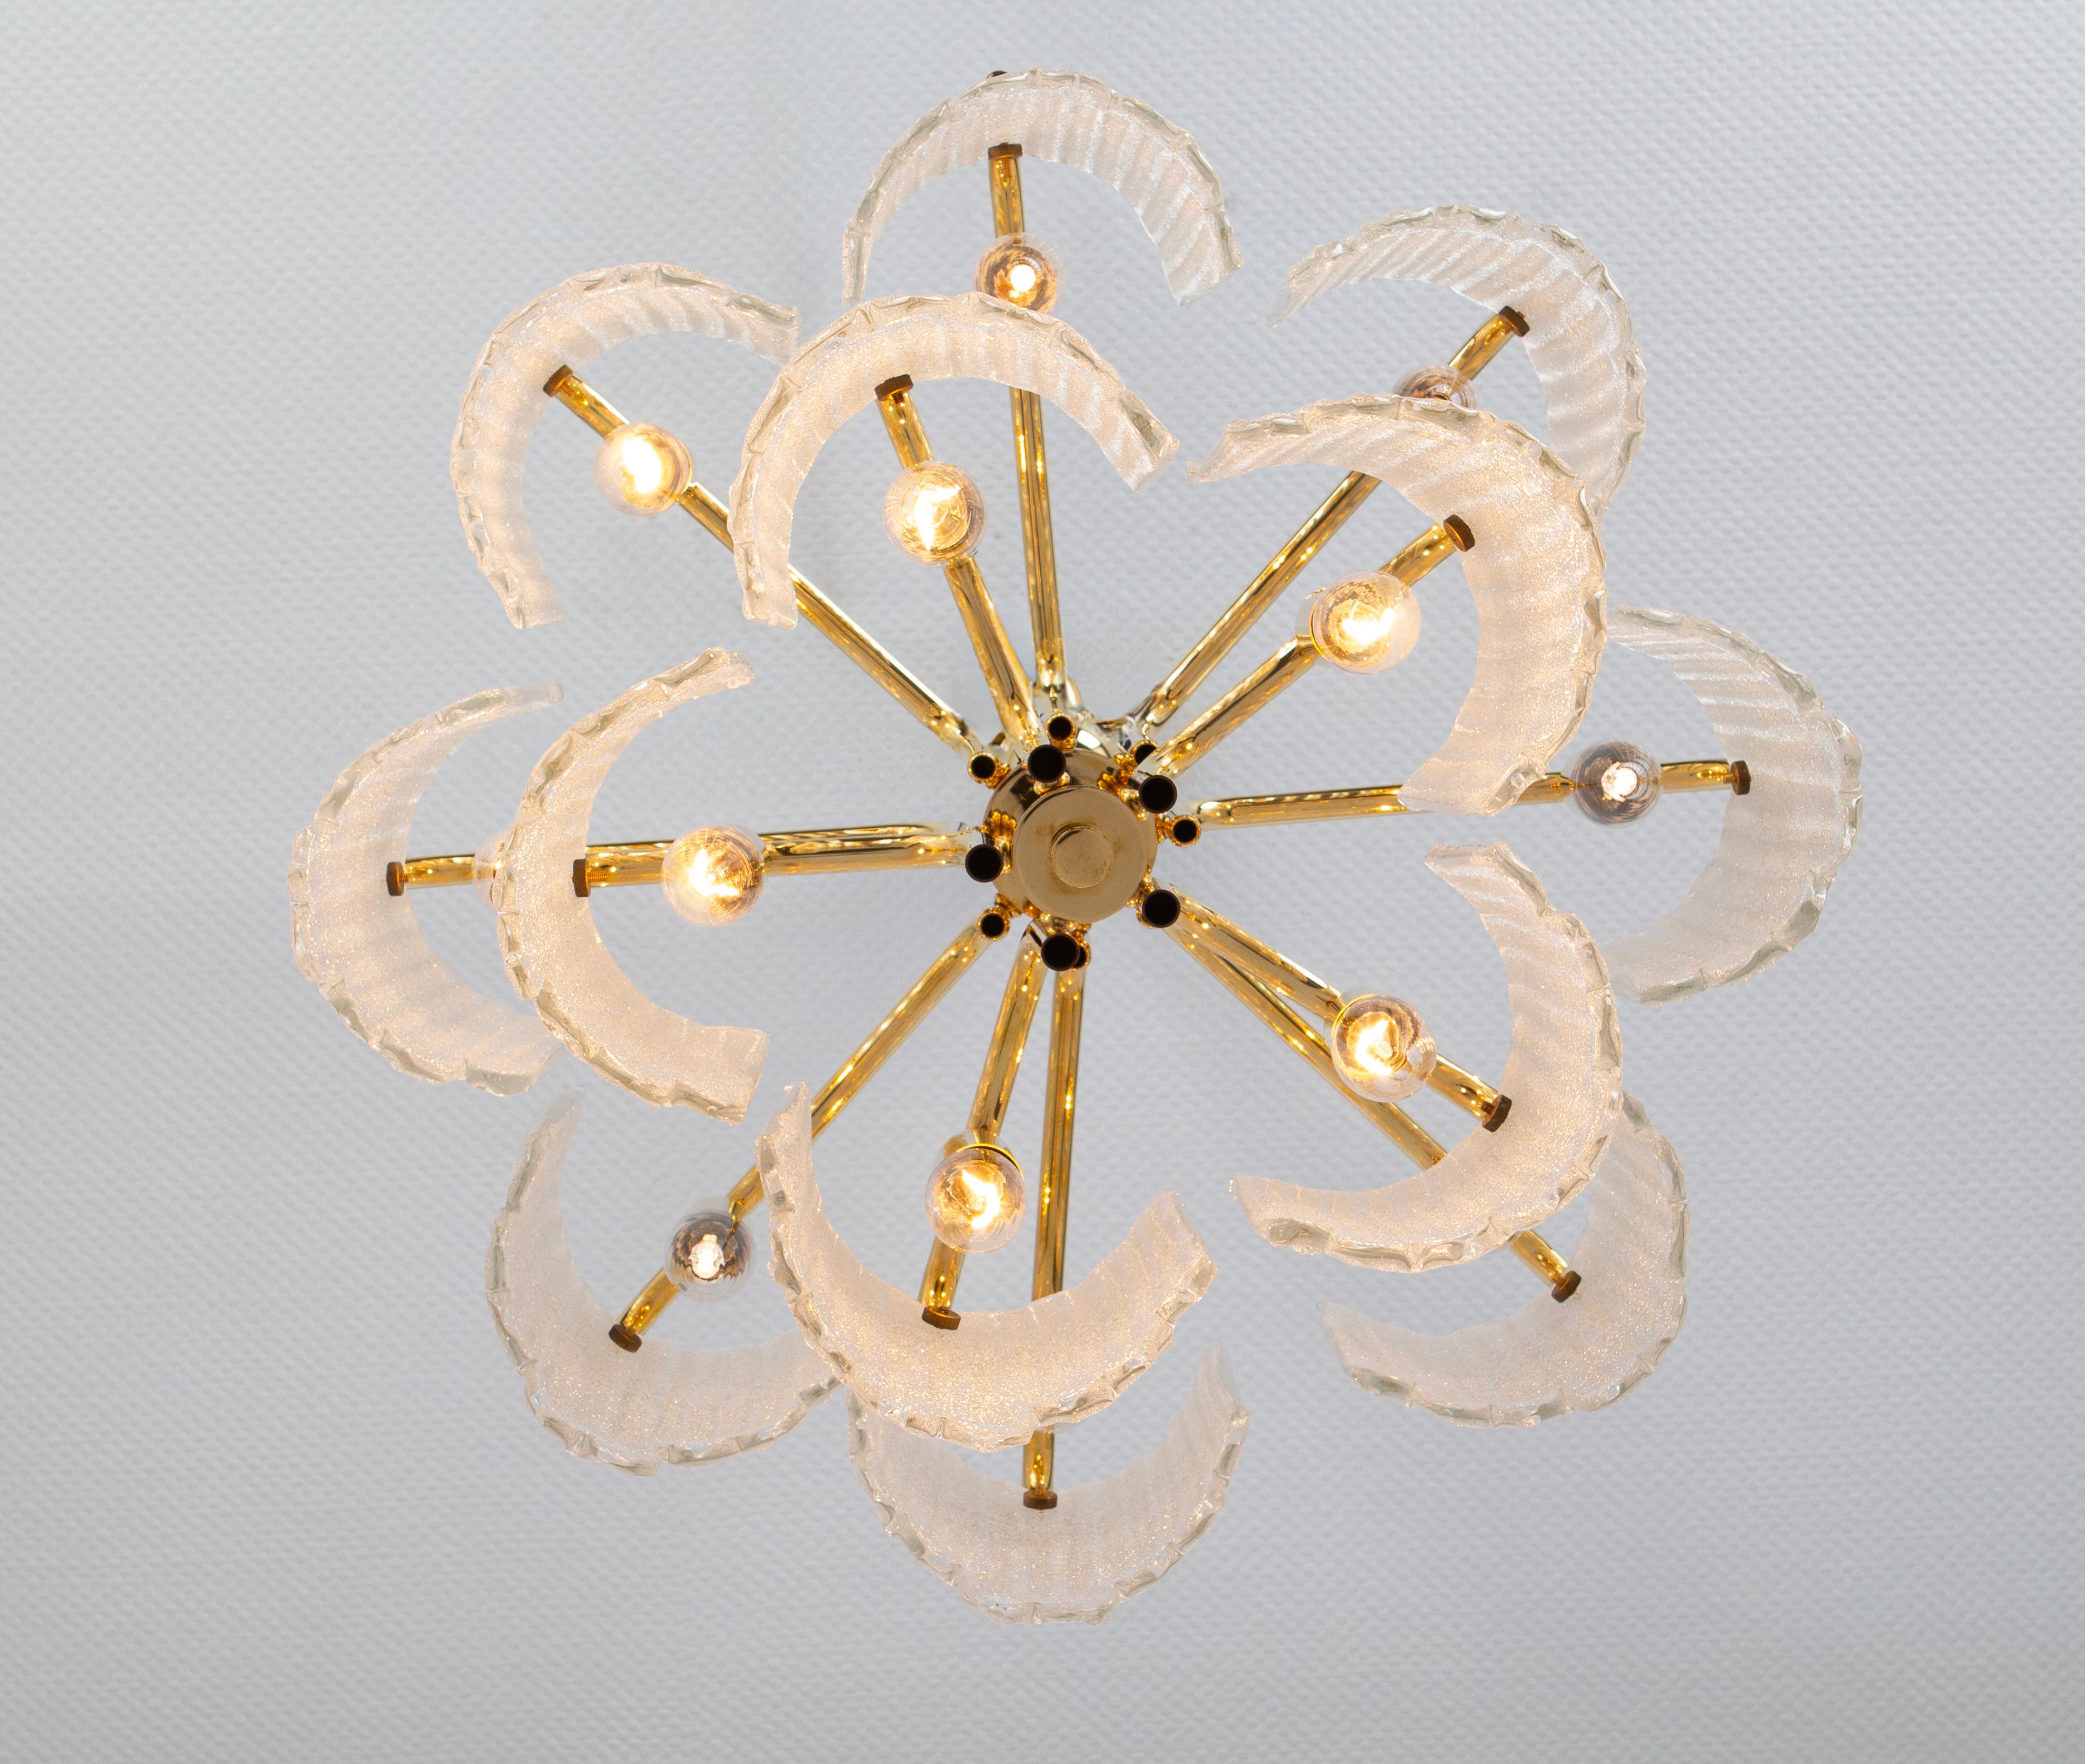 1 of 2 Stunning Carl Fagerlund Chandelier Murano Glass Leaves, 1960s For Sale 2